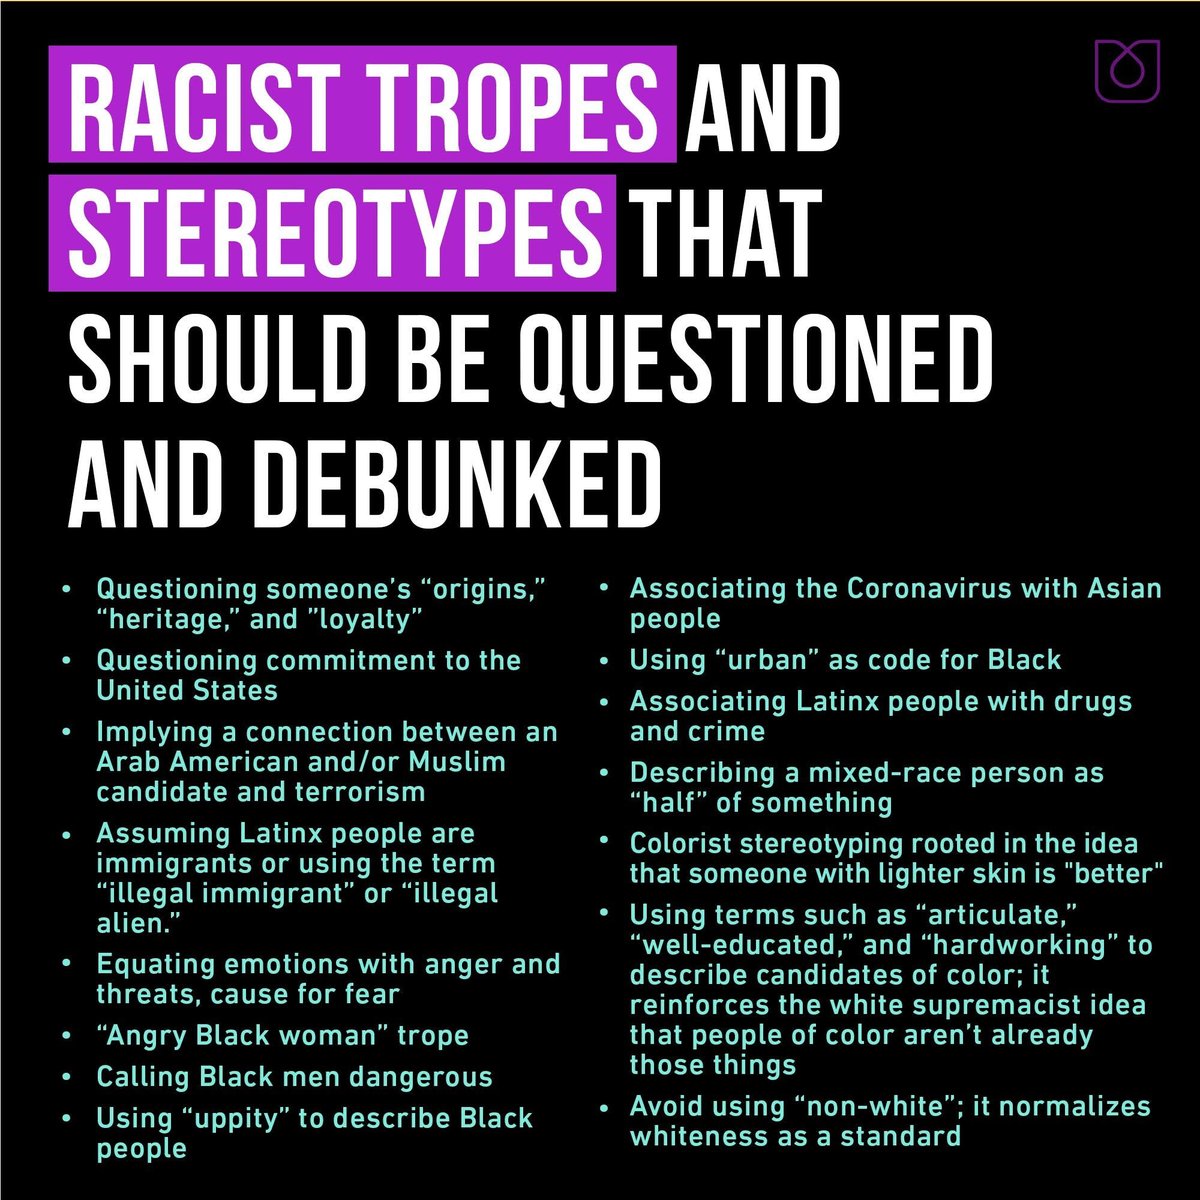 Media:  #GetItRightRacist tropes & stereotypes that should be questioned & debunked: